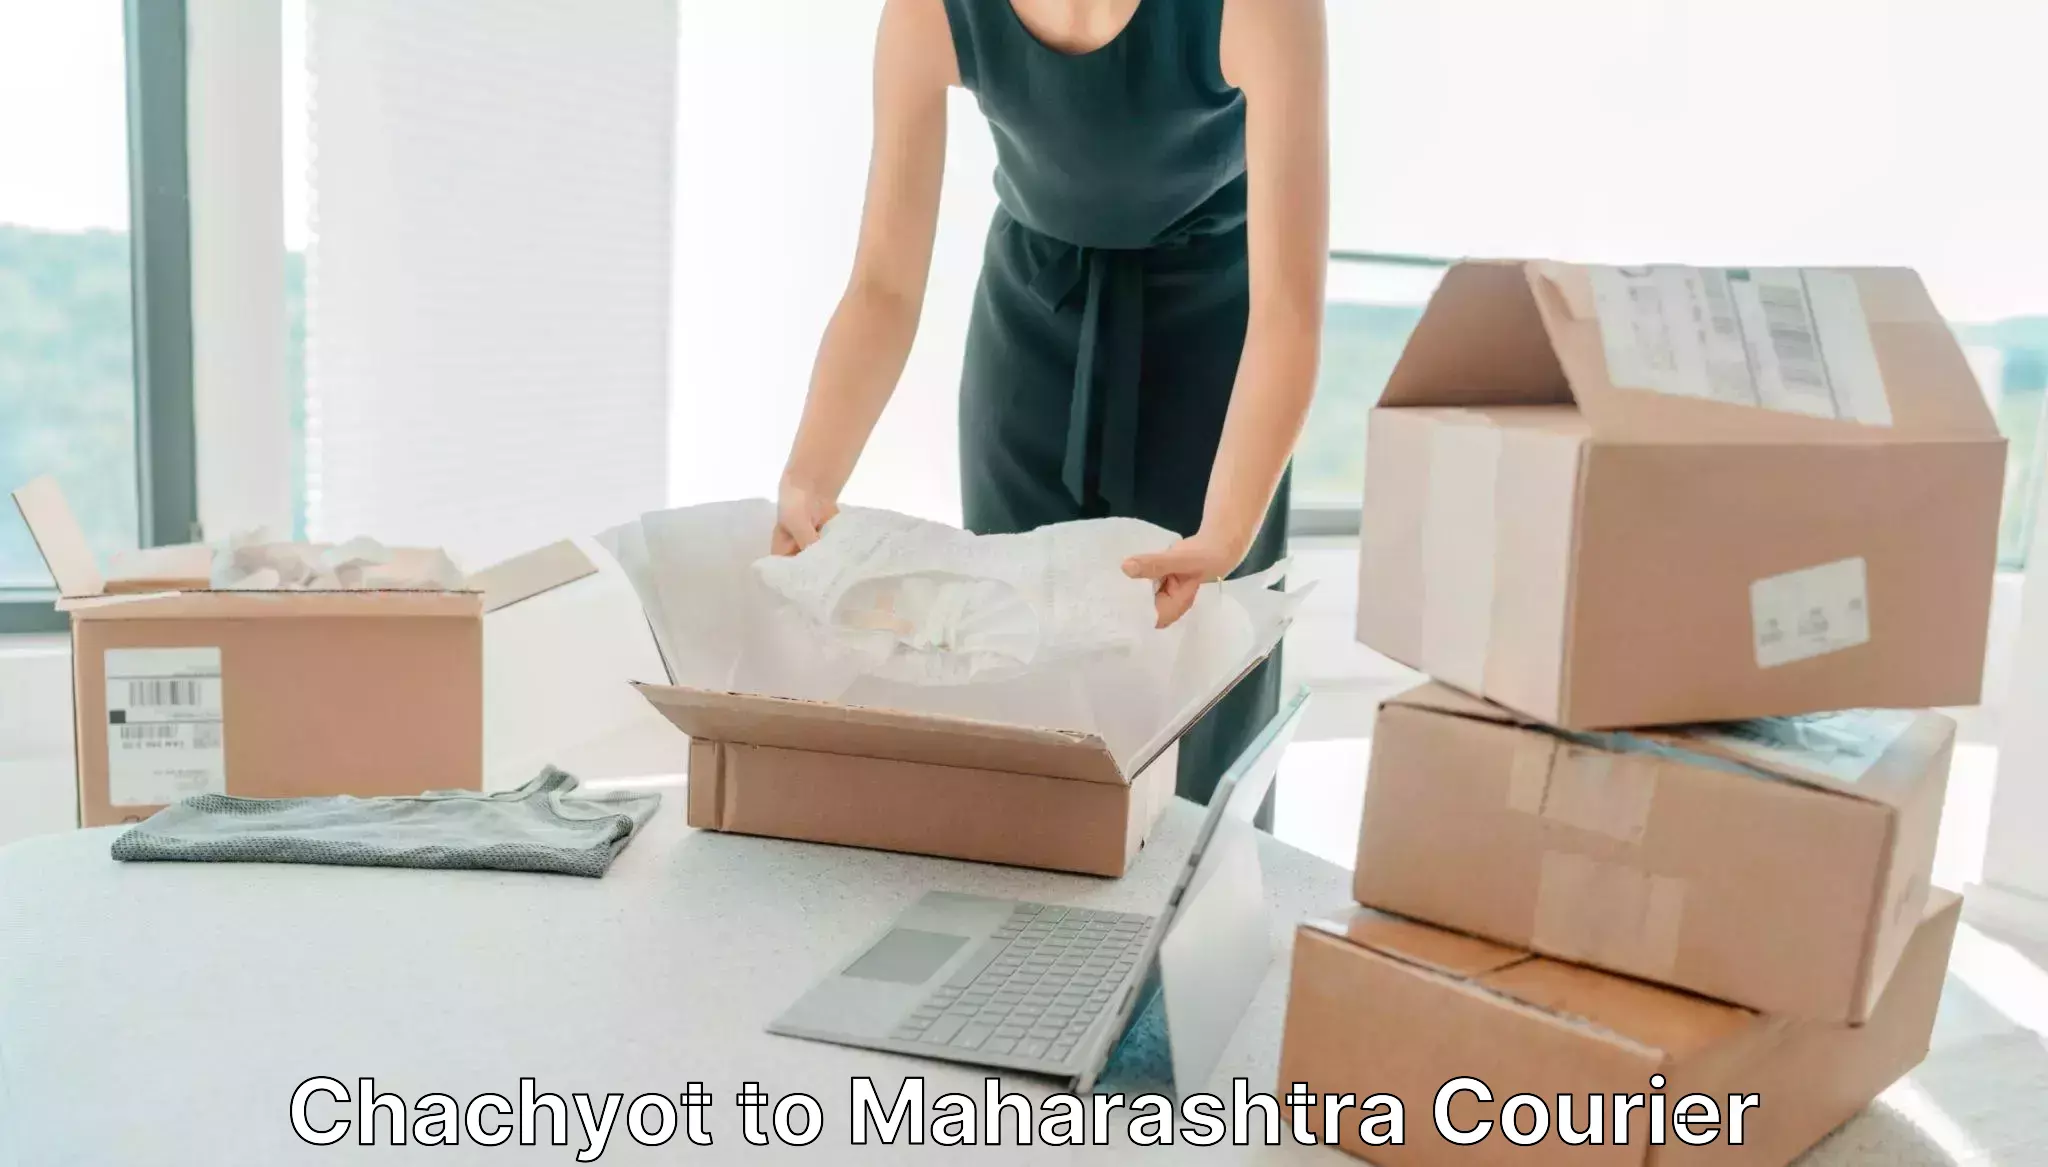 Online courier booking Chachyot to Osmanabad